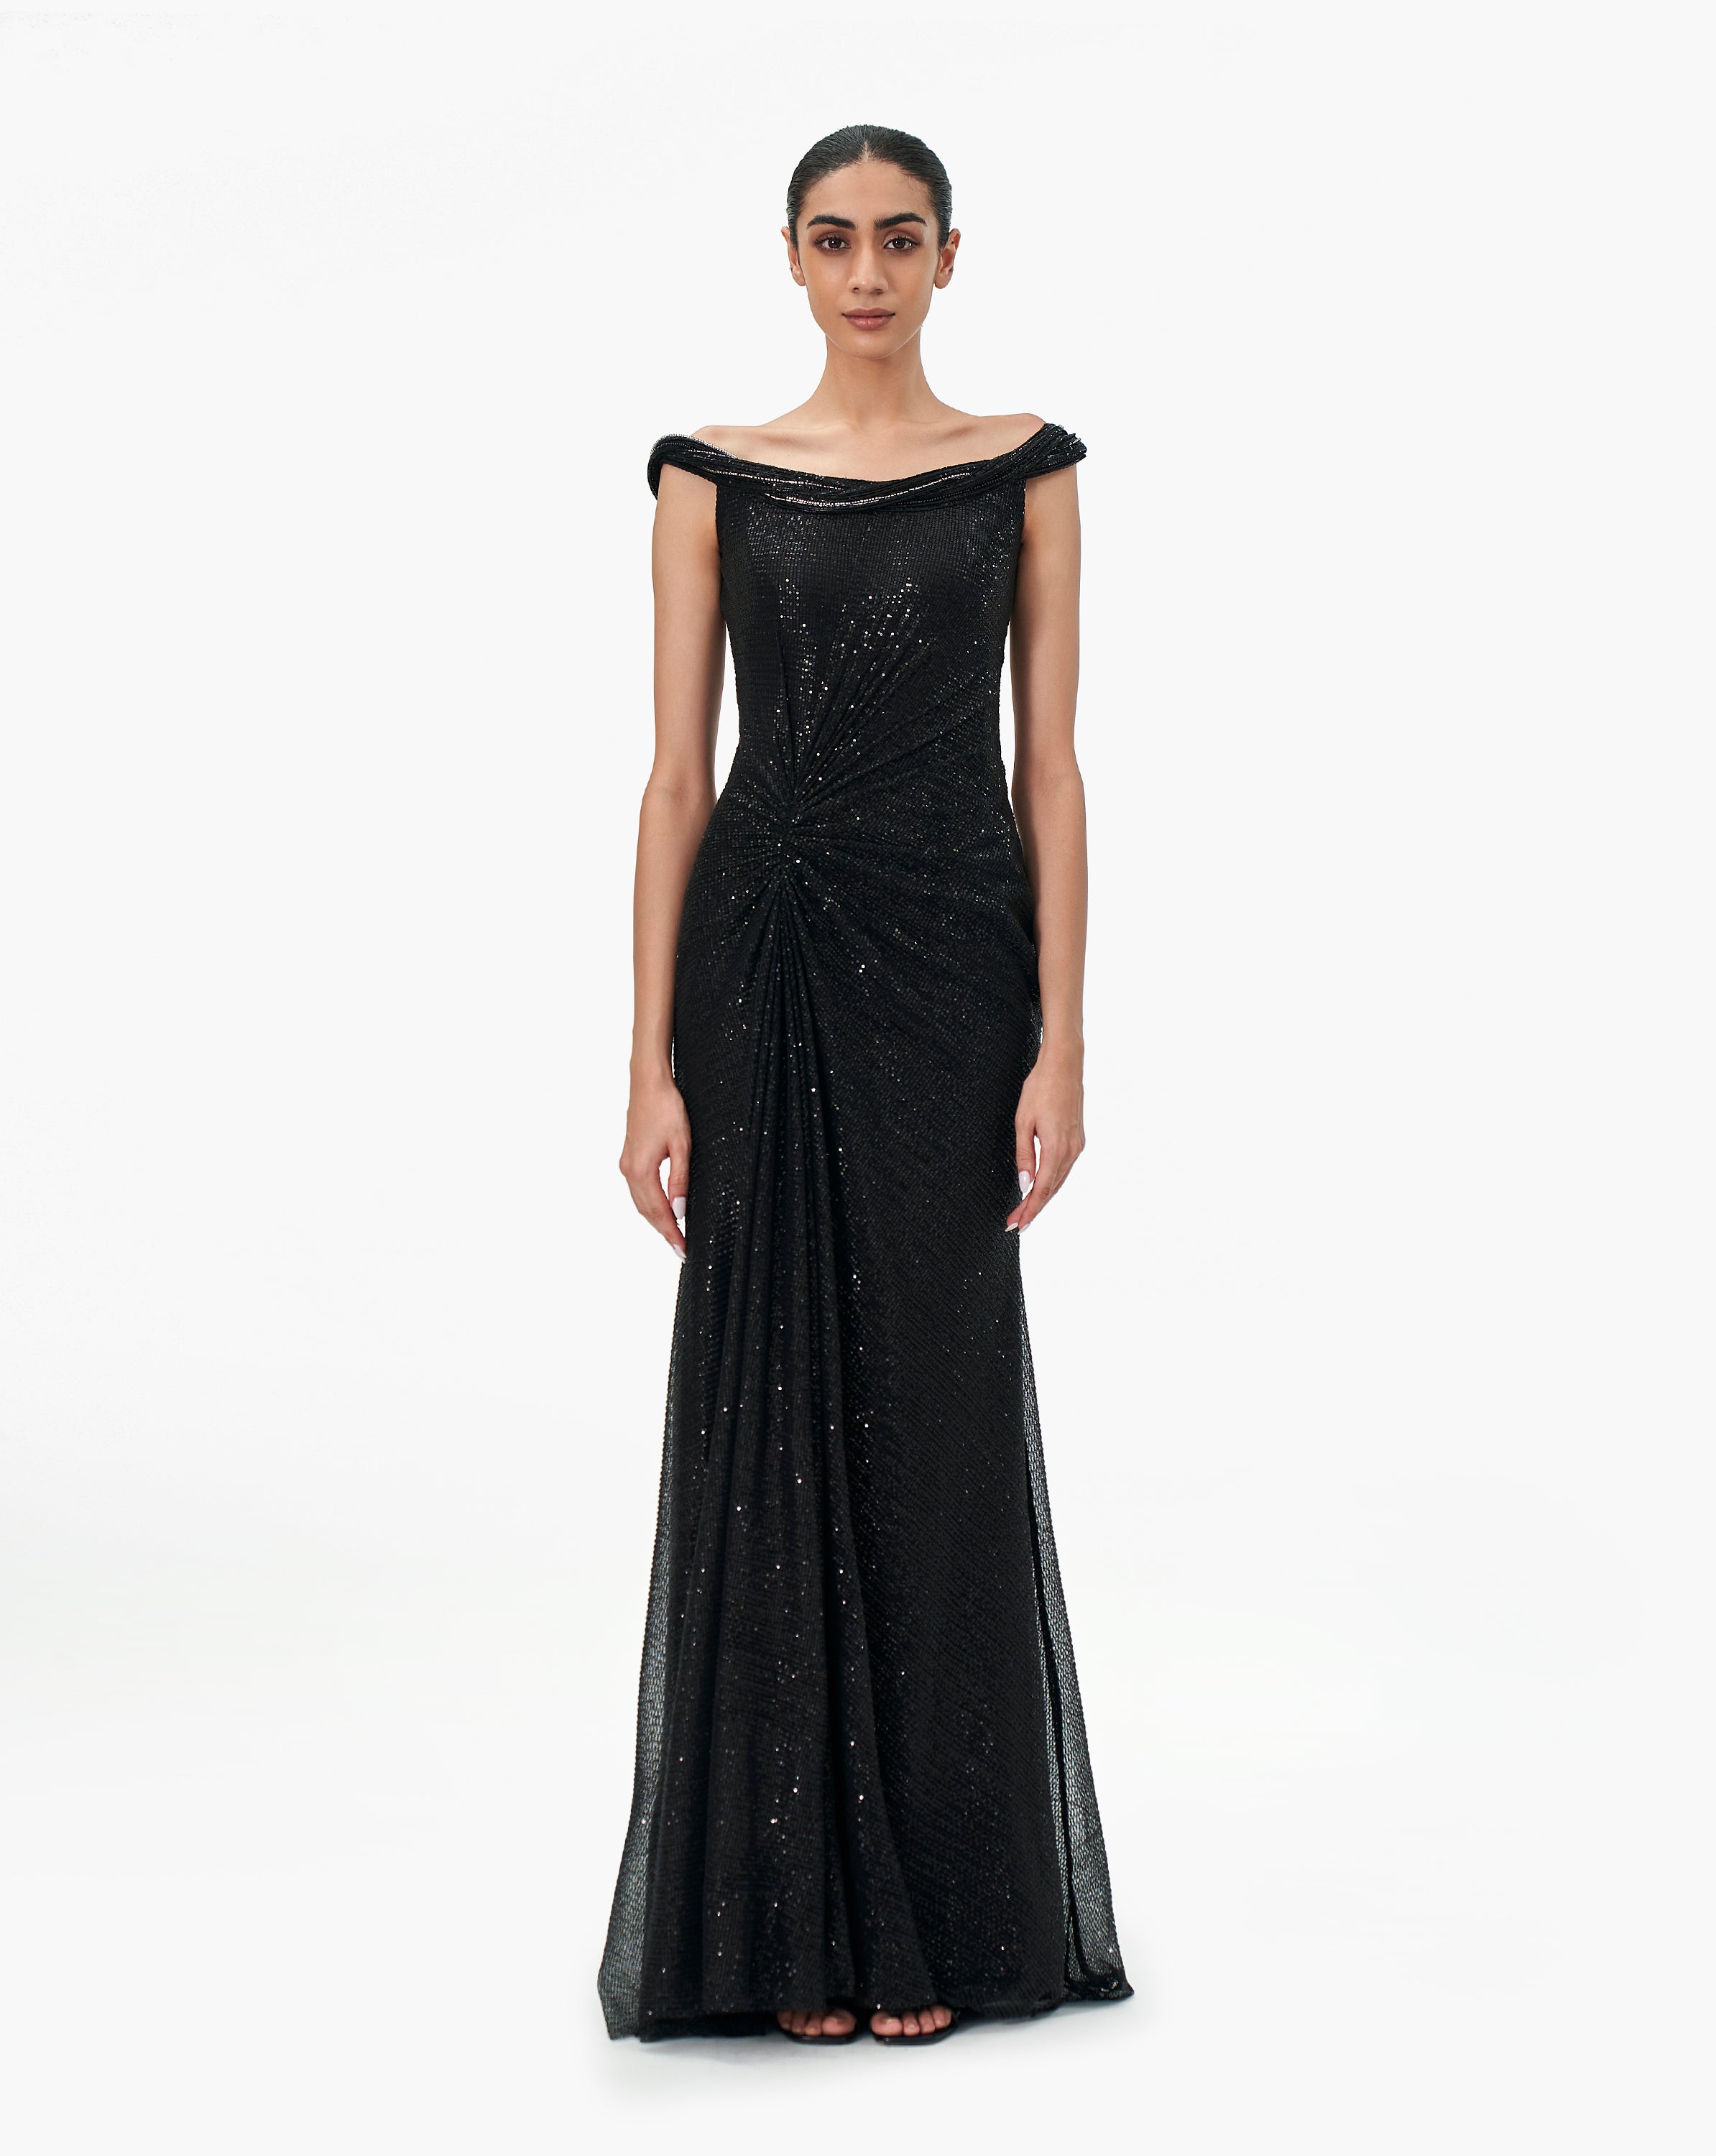 Shine Bright High Neck Tulle Maxi Dress in Shimmer Black - Retro, Indie and  Unique Fashion